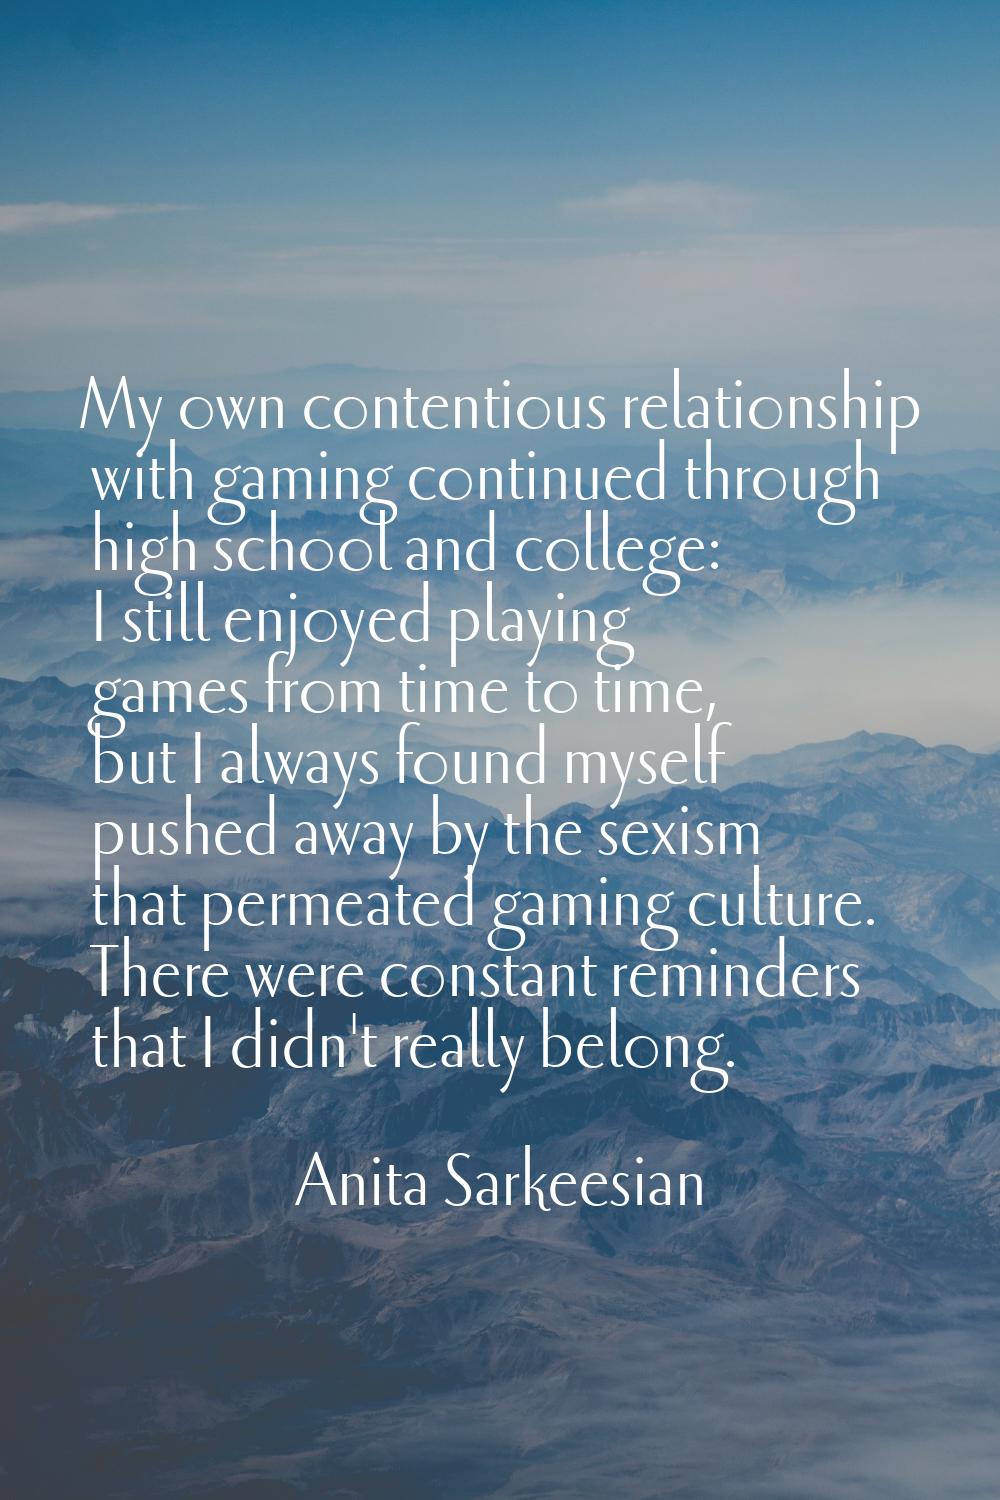 My own contentious relationship with gaming continued through high school and college: I still enjo